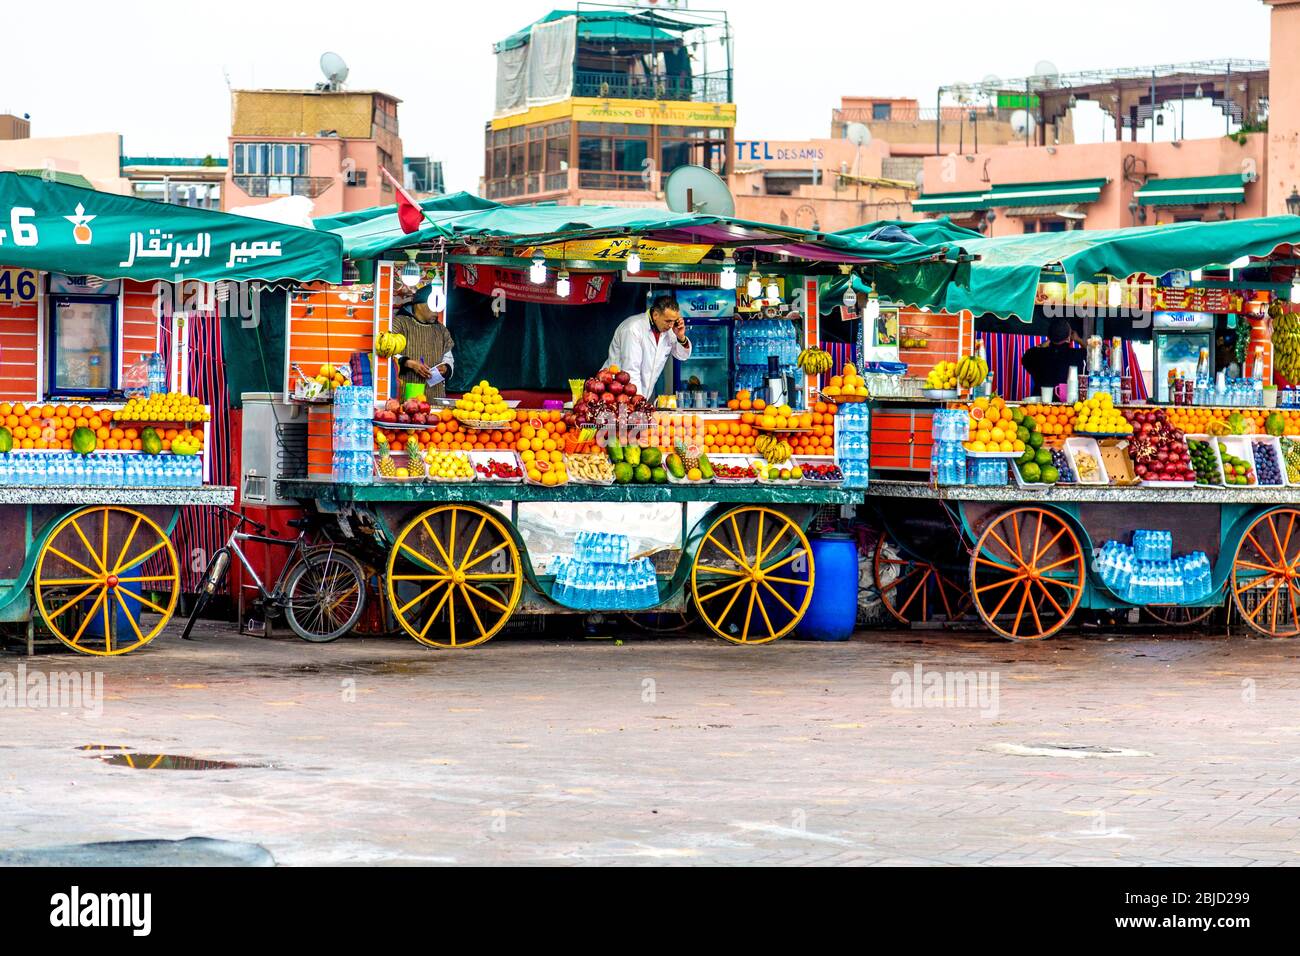 Fruit juice stalls, carts, early in the morning at Jemaa el-Fnaa market, Marrakesh, Morocco Stock Photo